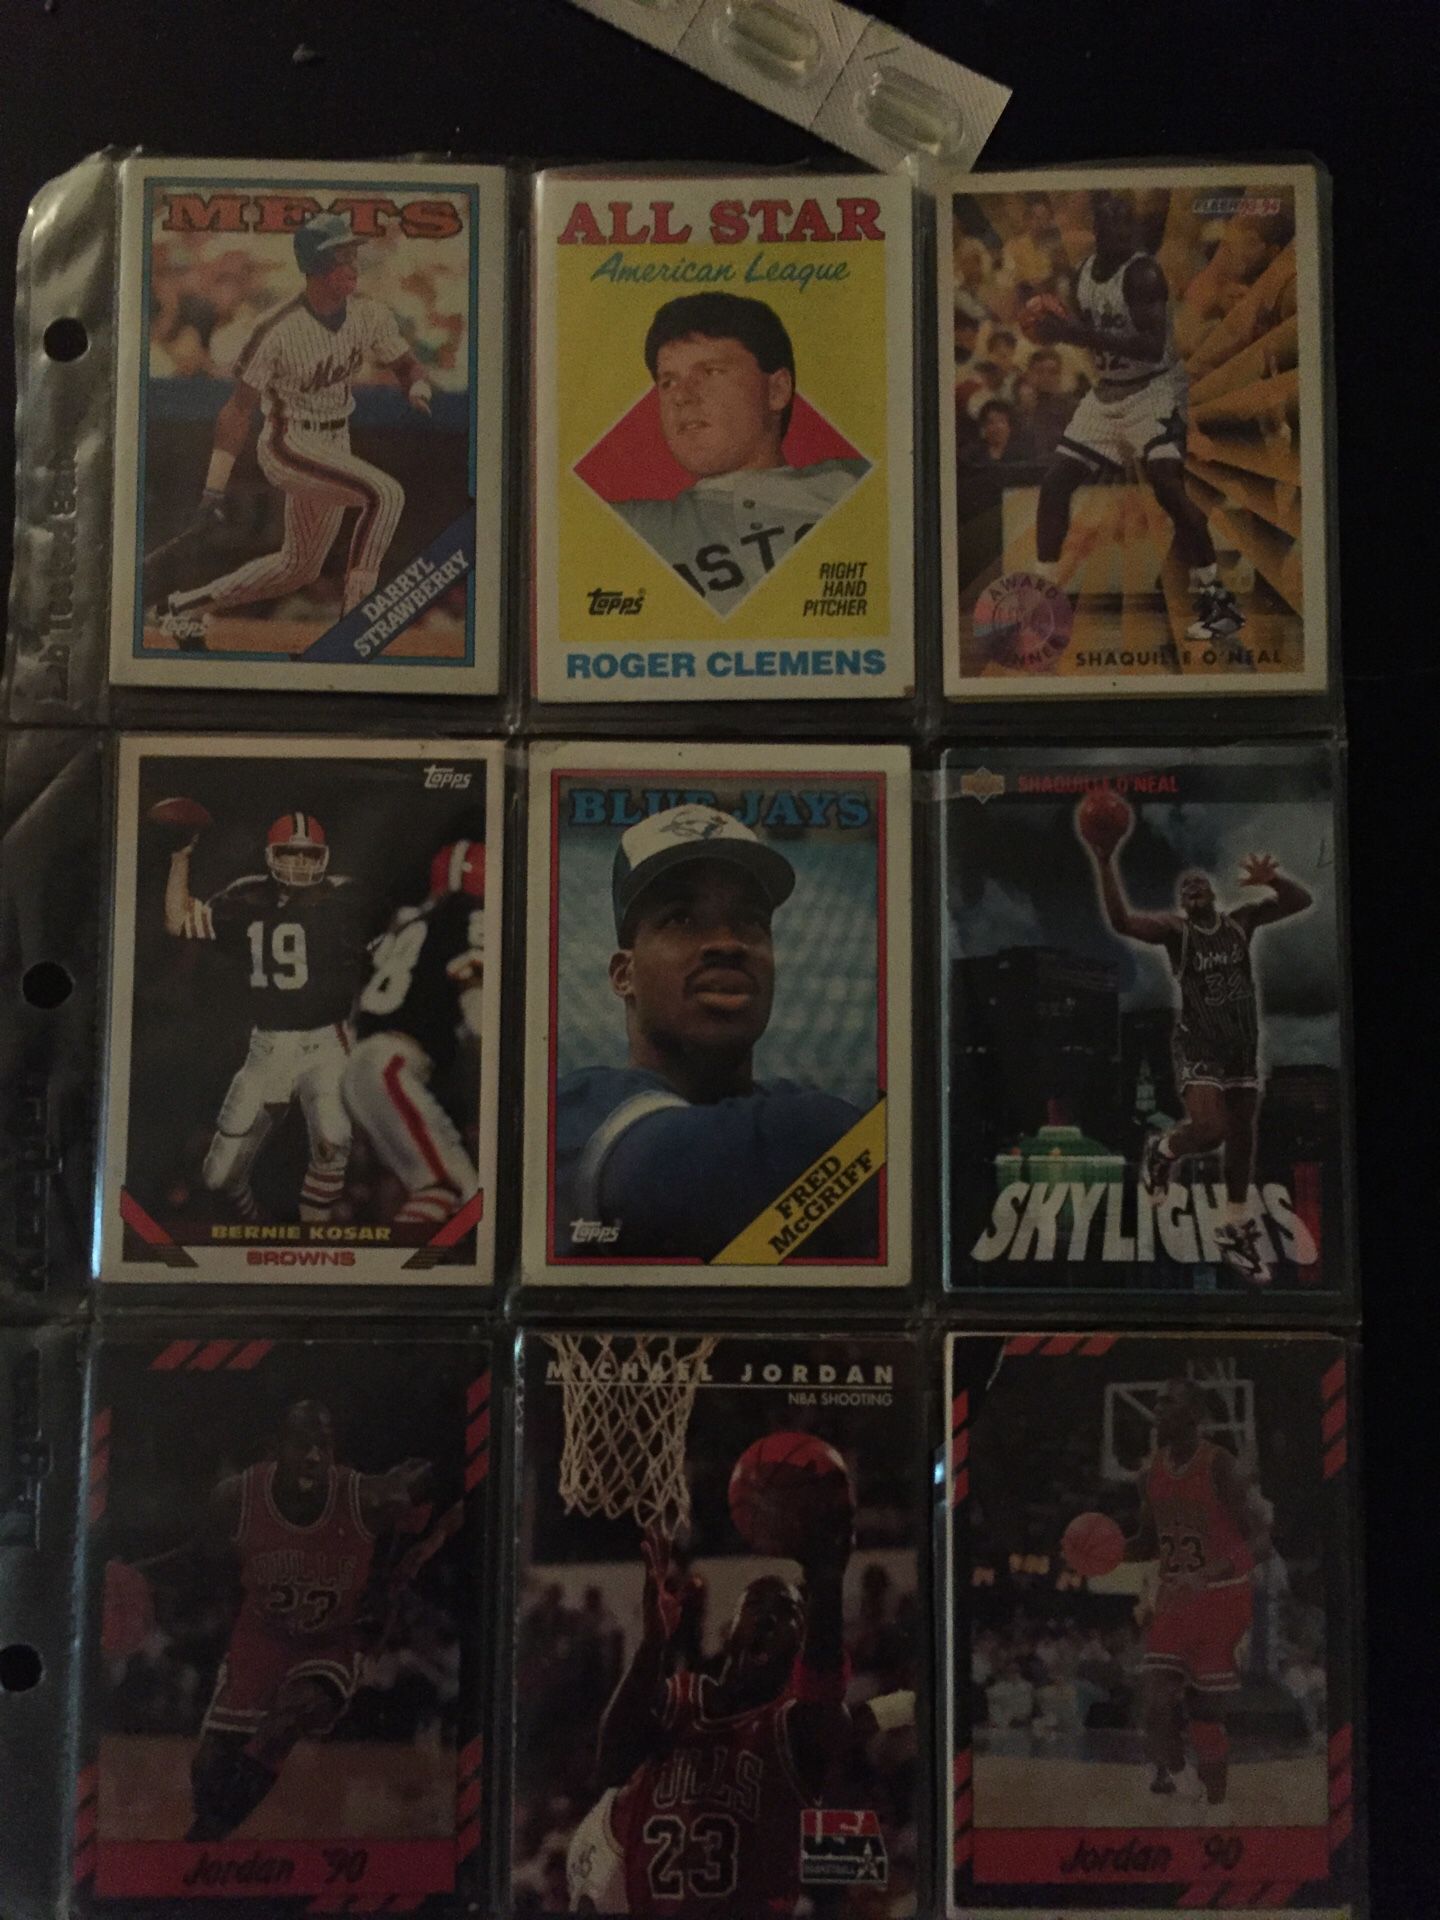 Rare baseball and basketball cards for sale negotiate price with me